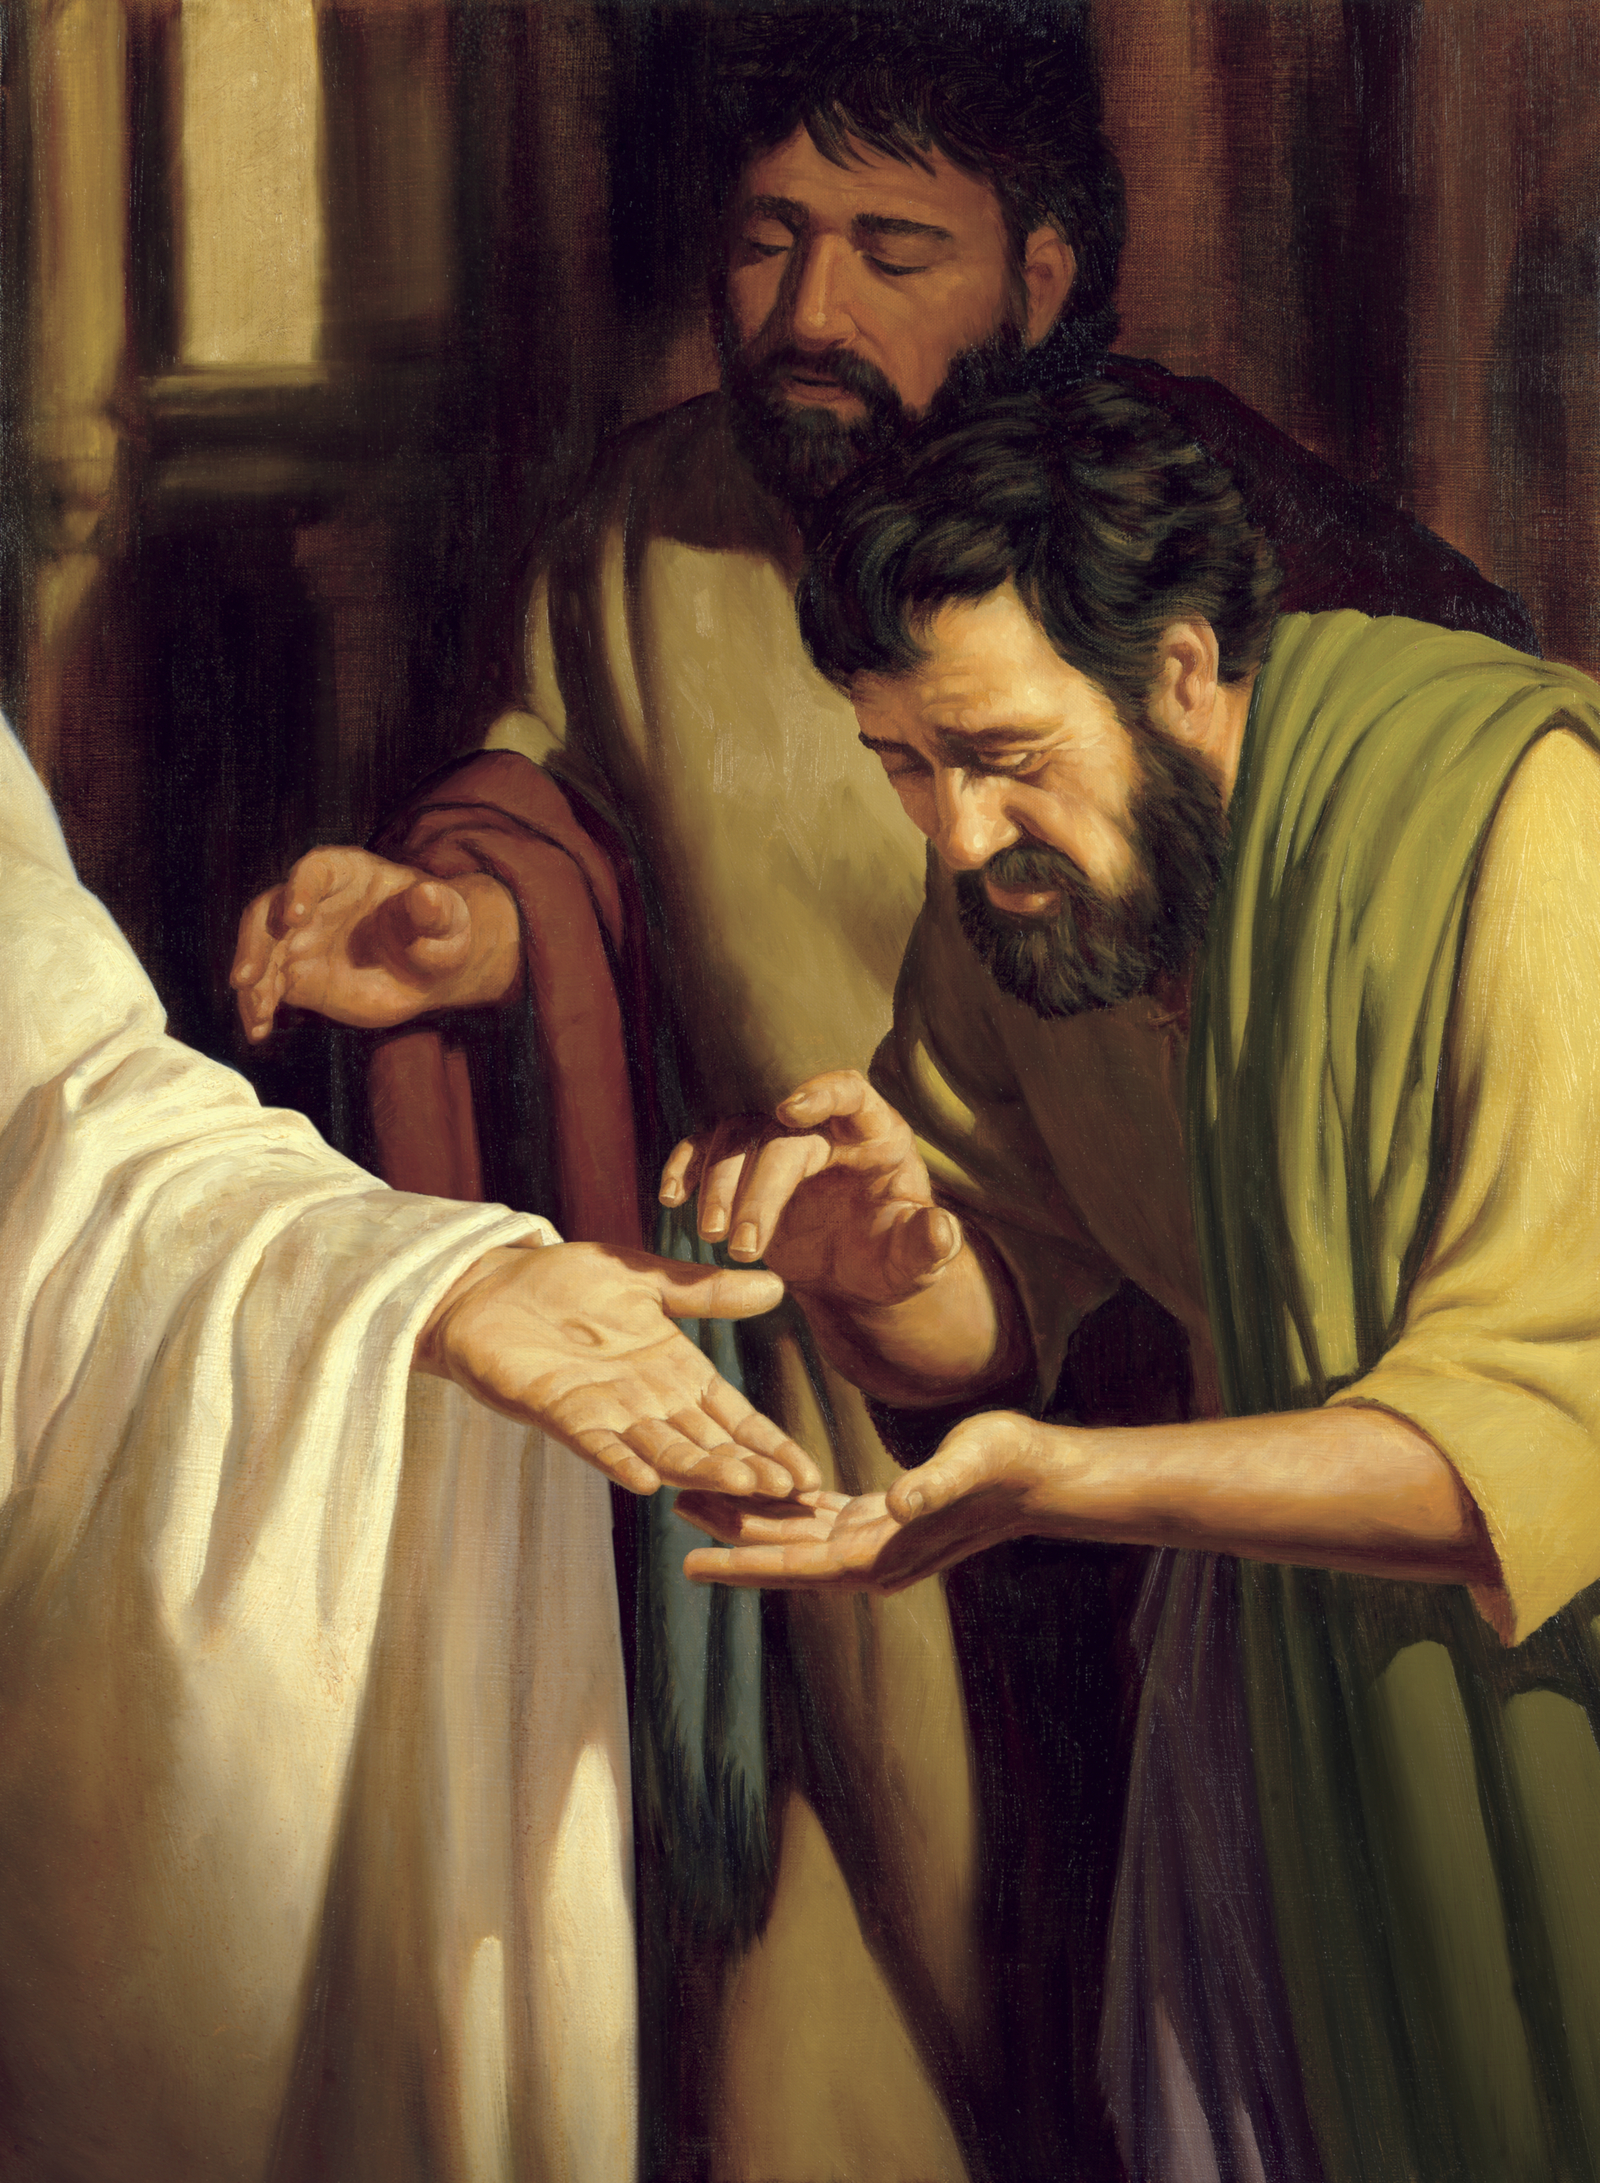 'Christ's Apostles Examine His Wounds' by Jeff Ward